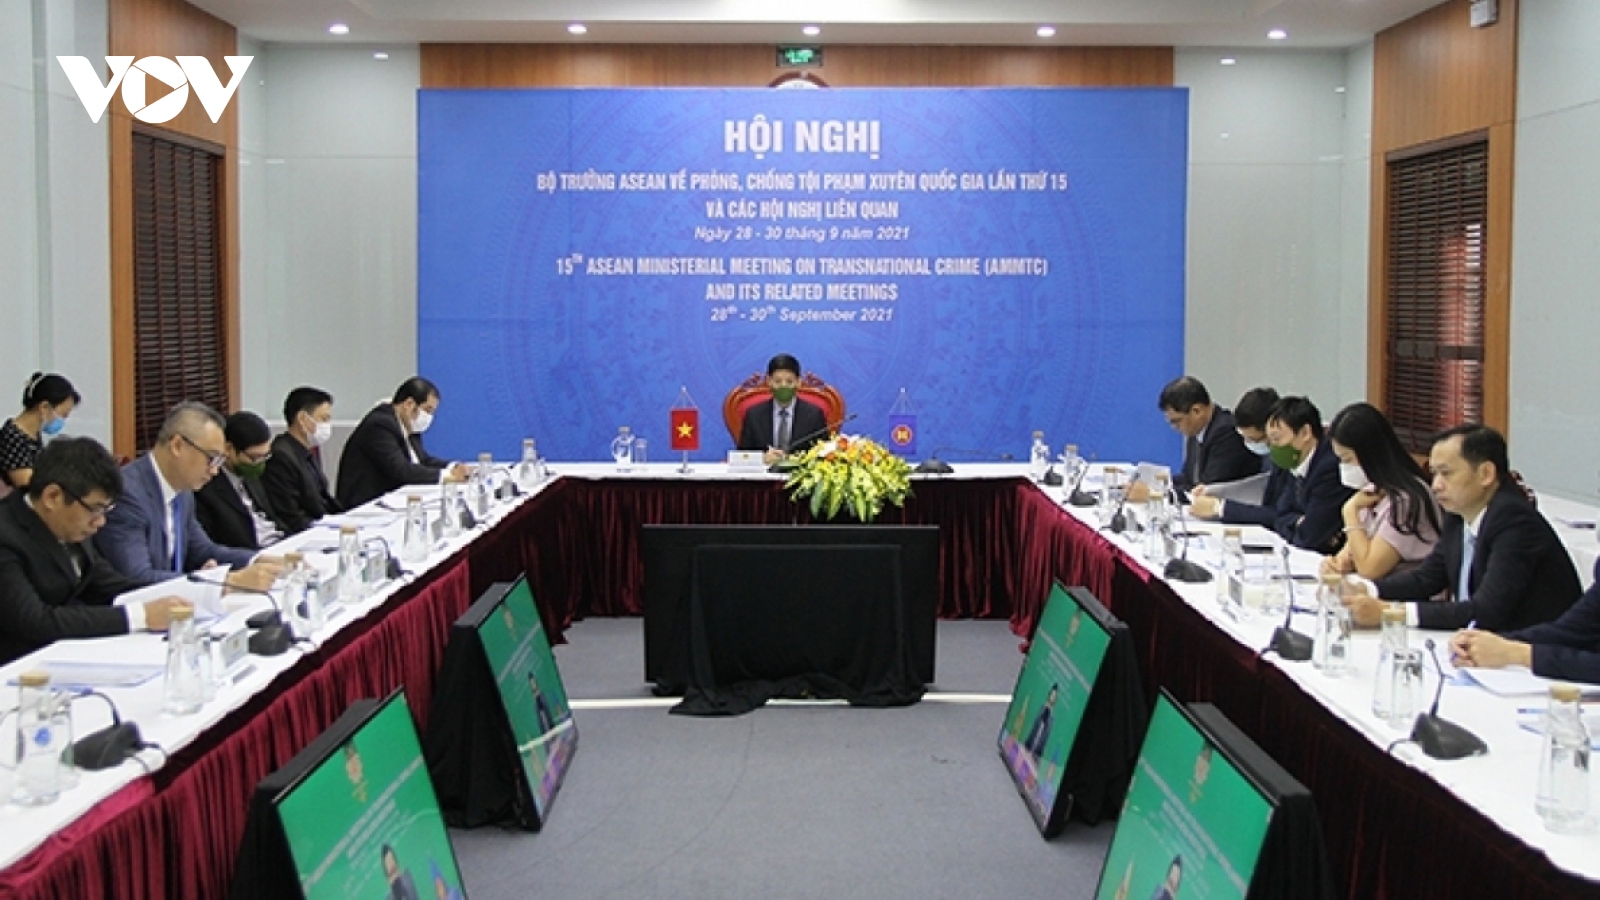 Vietnam pledges to boost co-operation in trans-national crime prevention and control